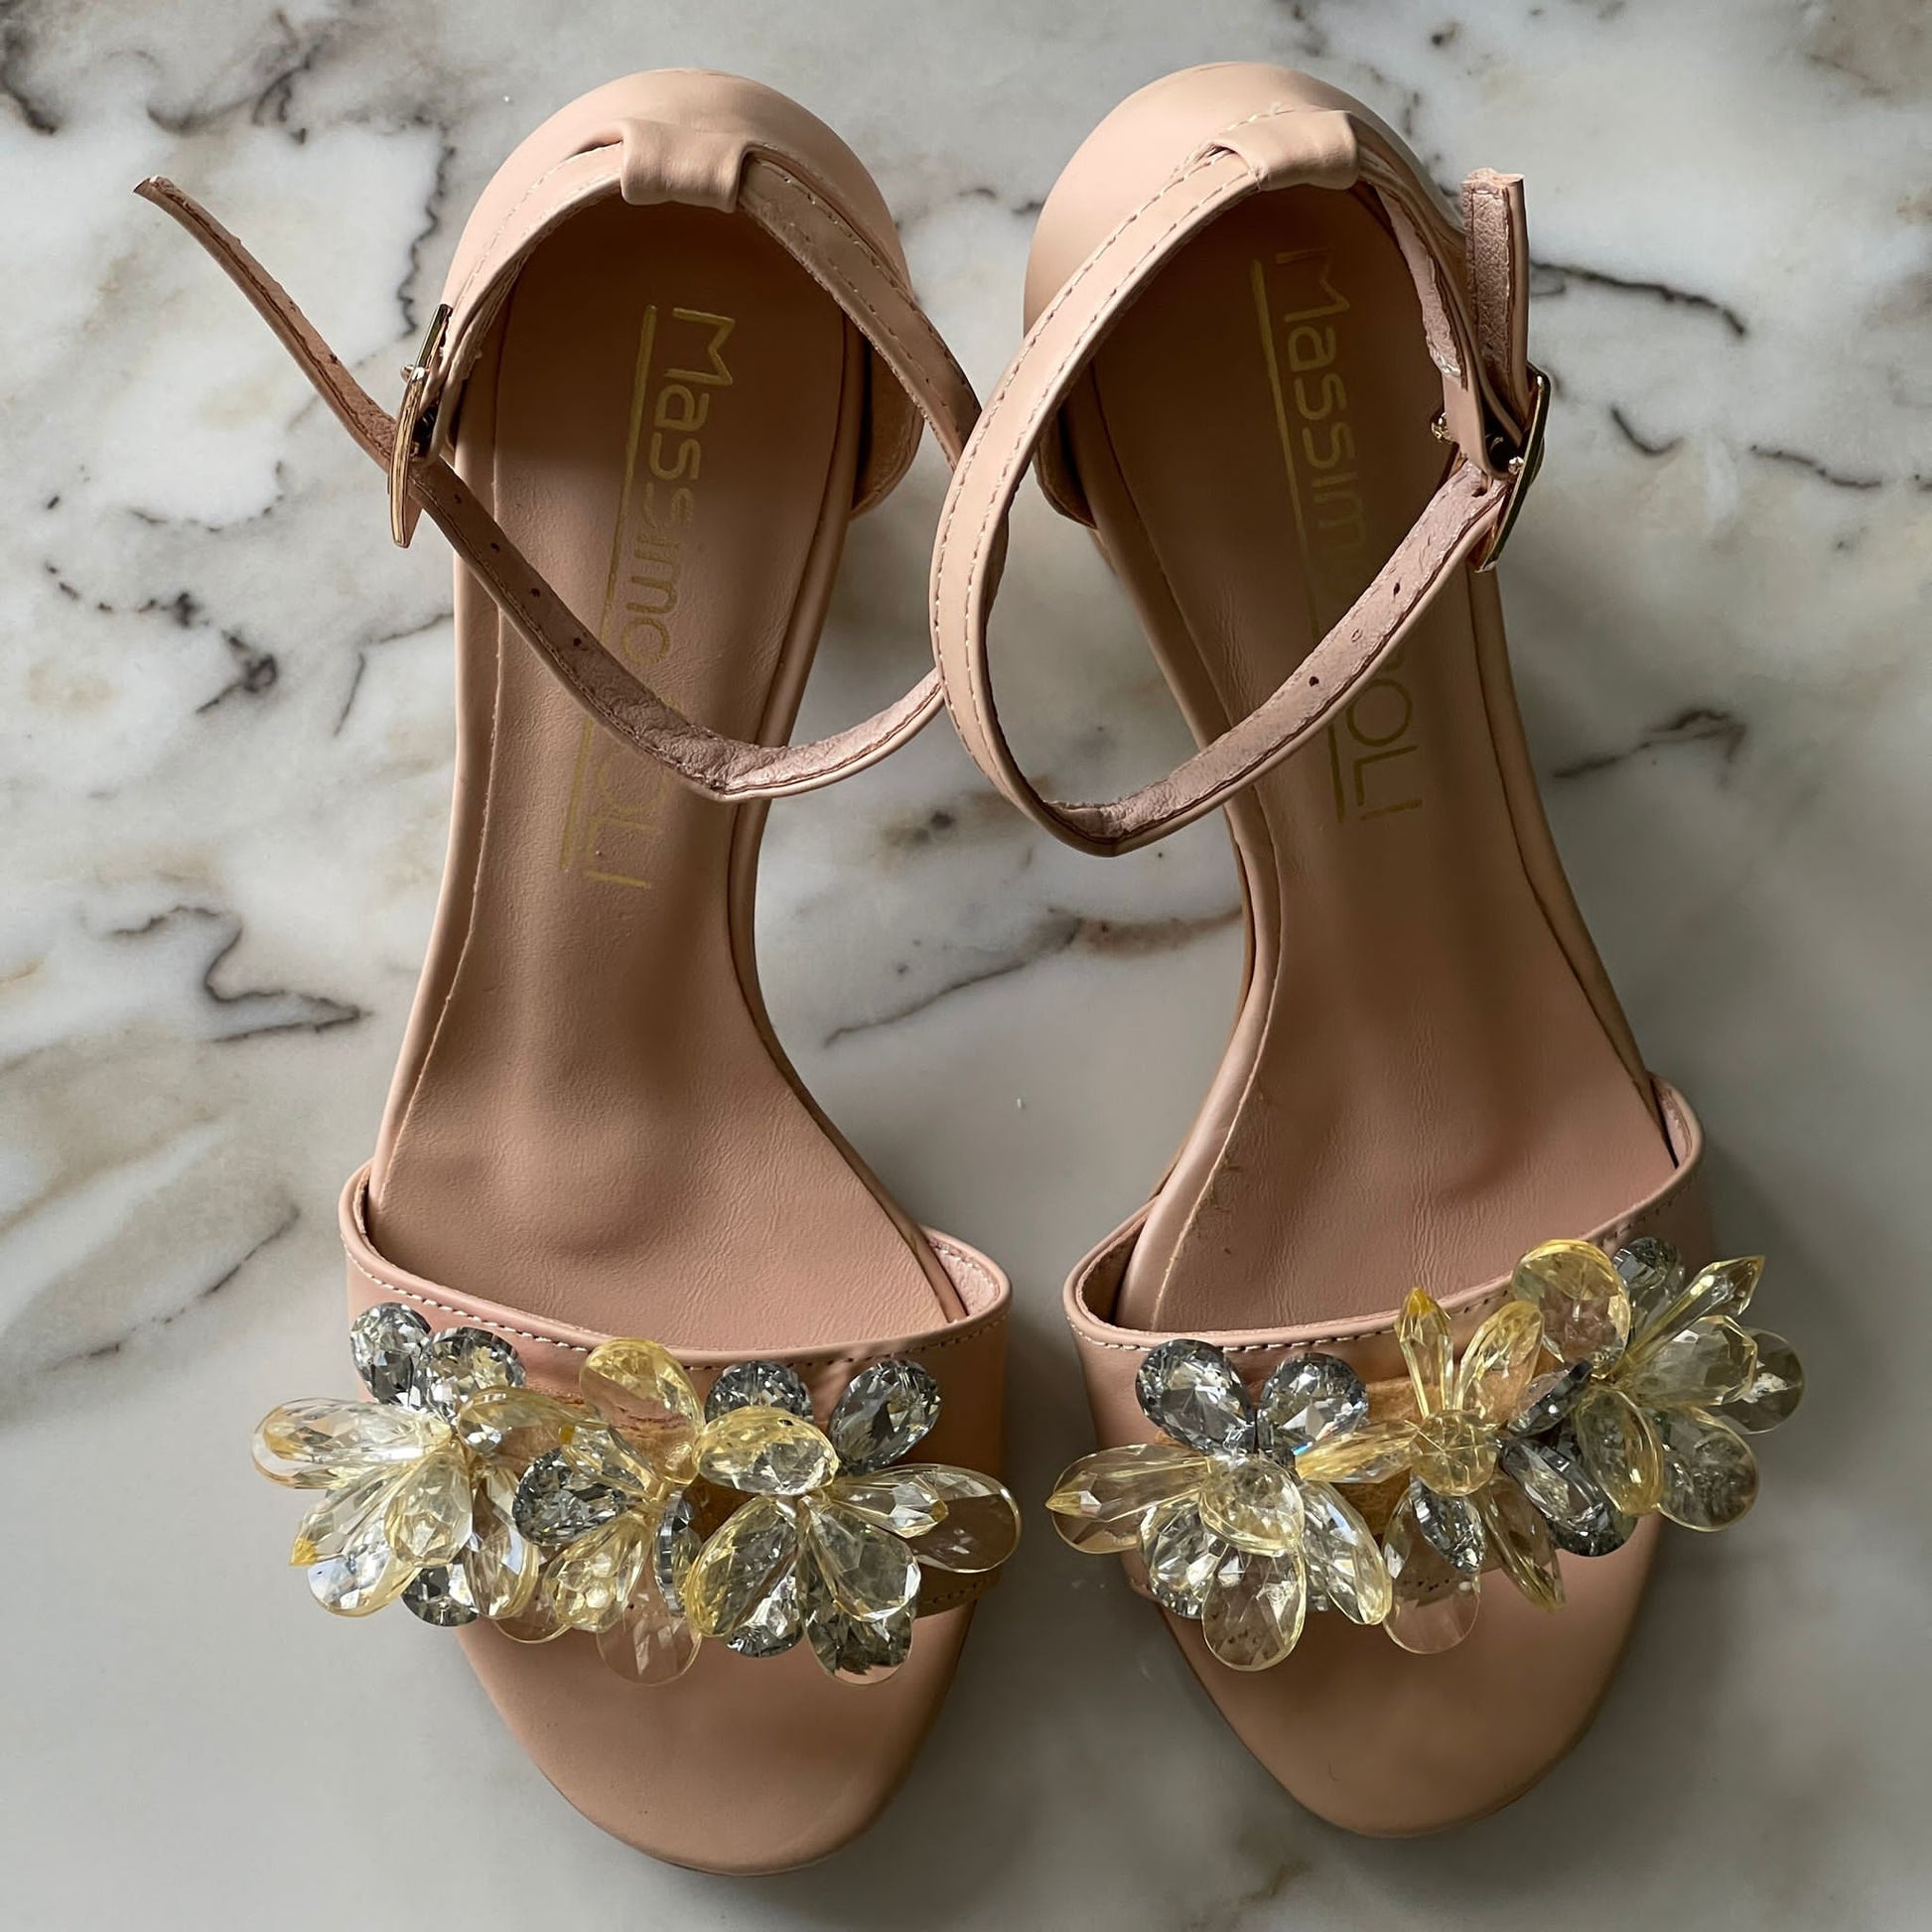 Crystal brooch petite sandals in nude leather